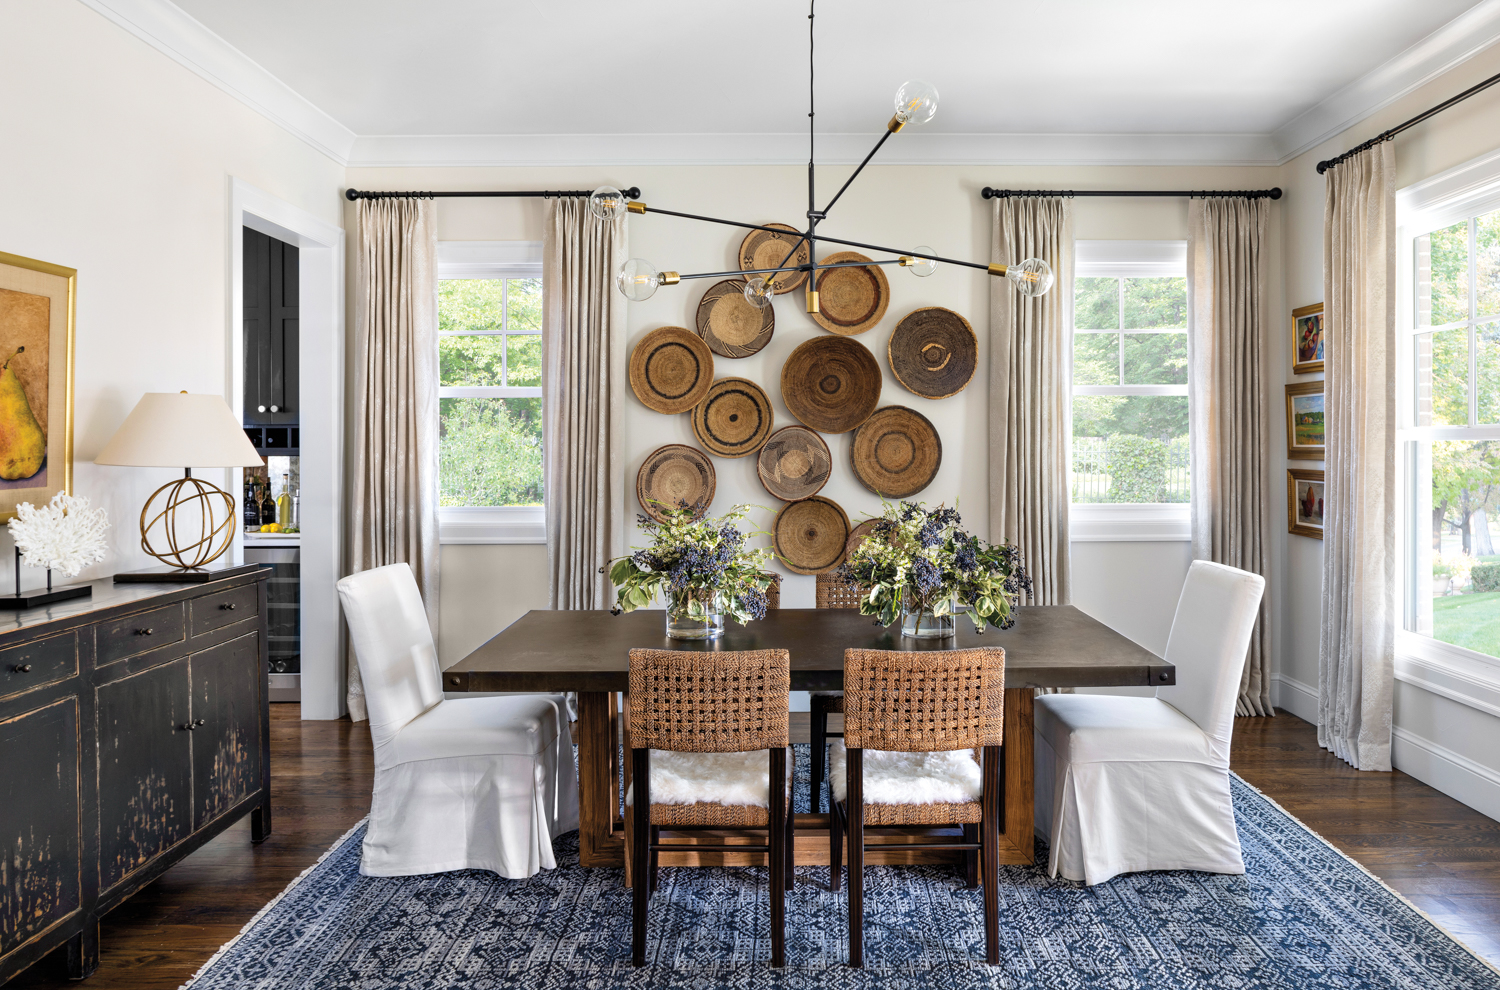 dining area with hanging basket collection, wood table, slipcovered chairs and dark blue rug